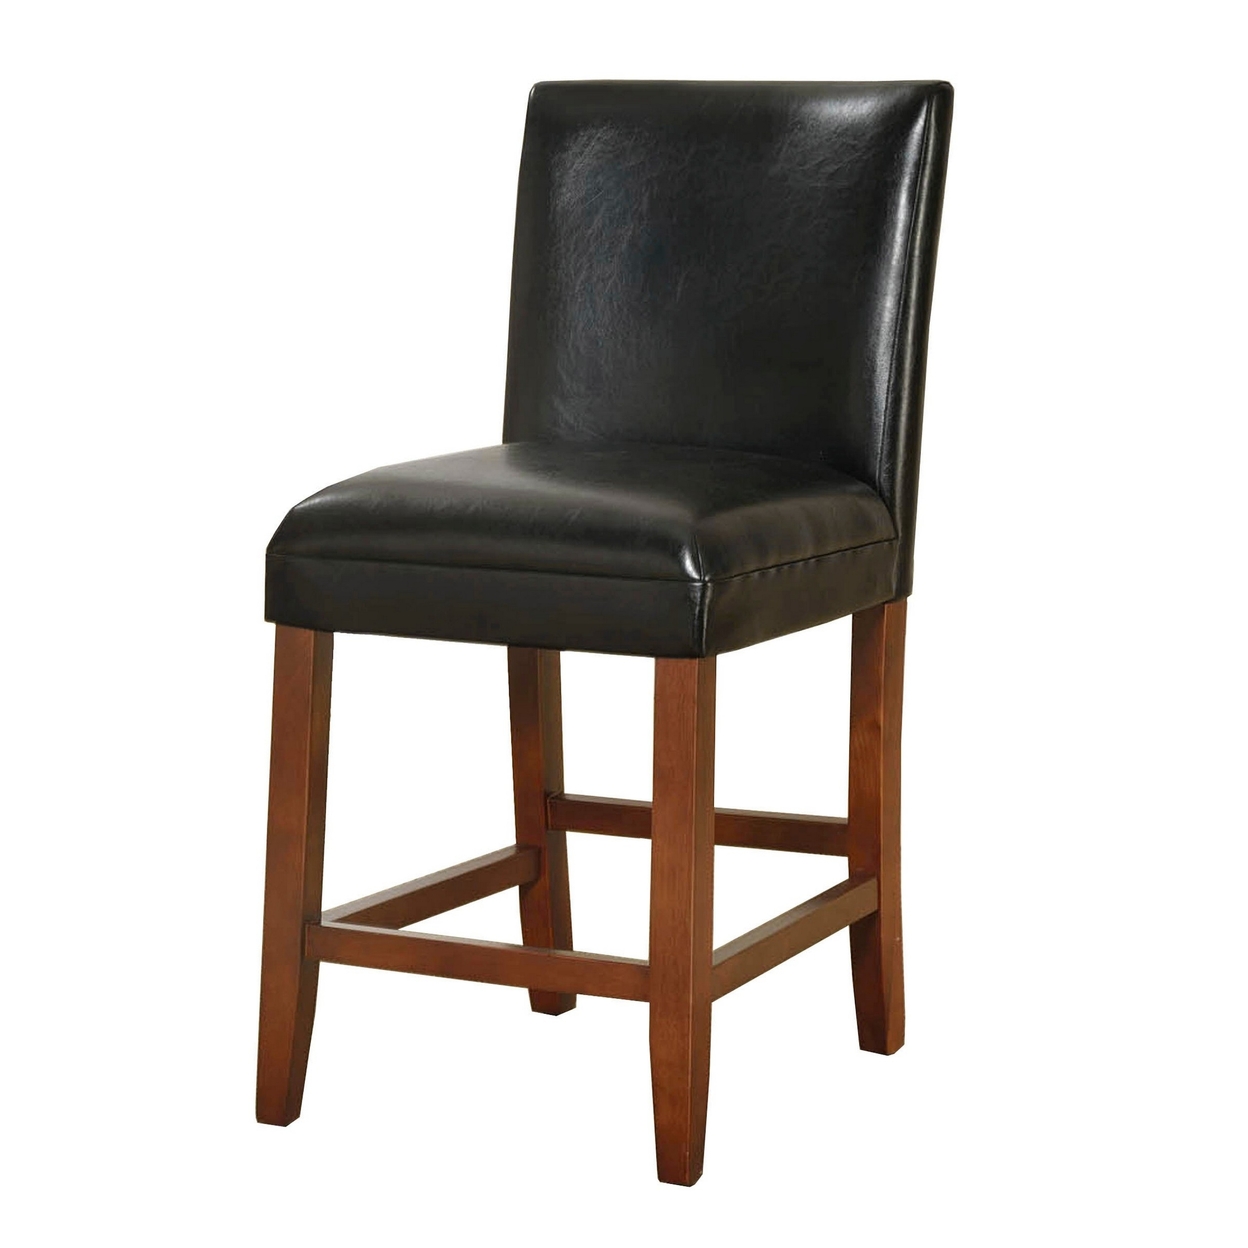 Wooden 24 Inch Bar Stool With Faux Leather Padded Seat And Tapered Feet, Black And Brown- Saltoro Sherpi